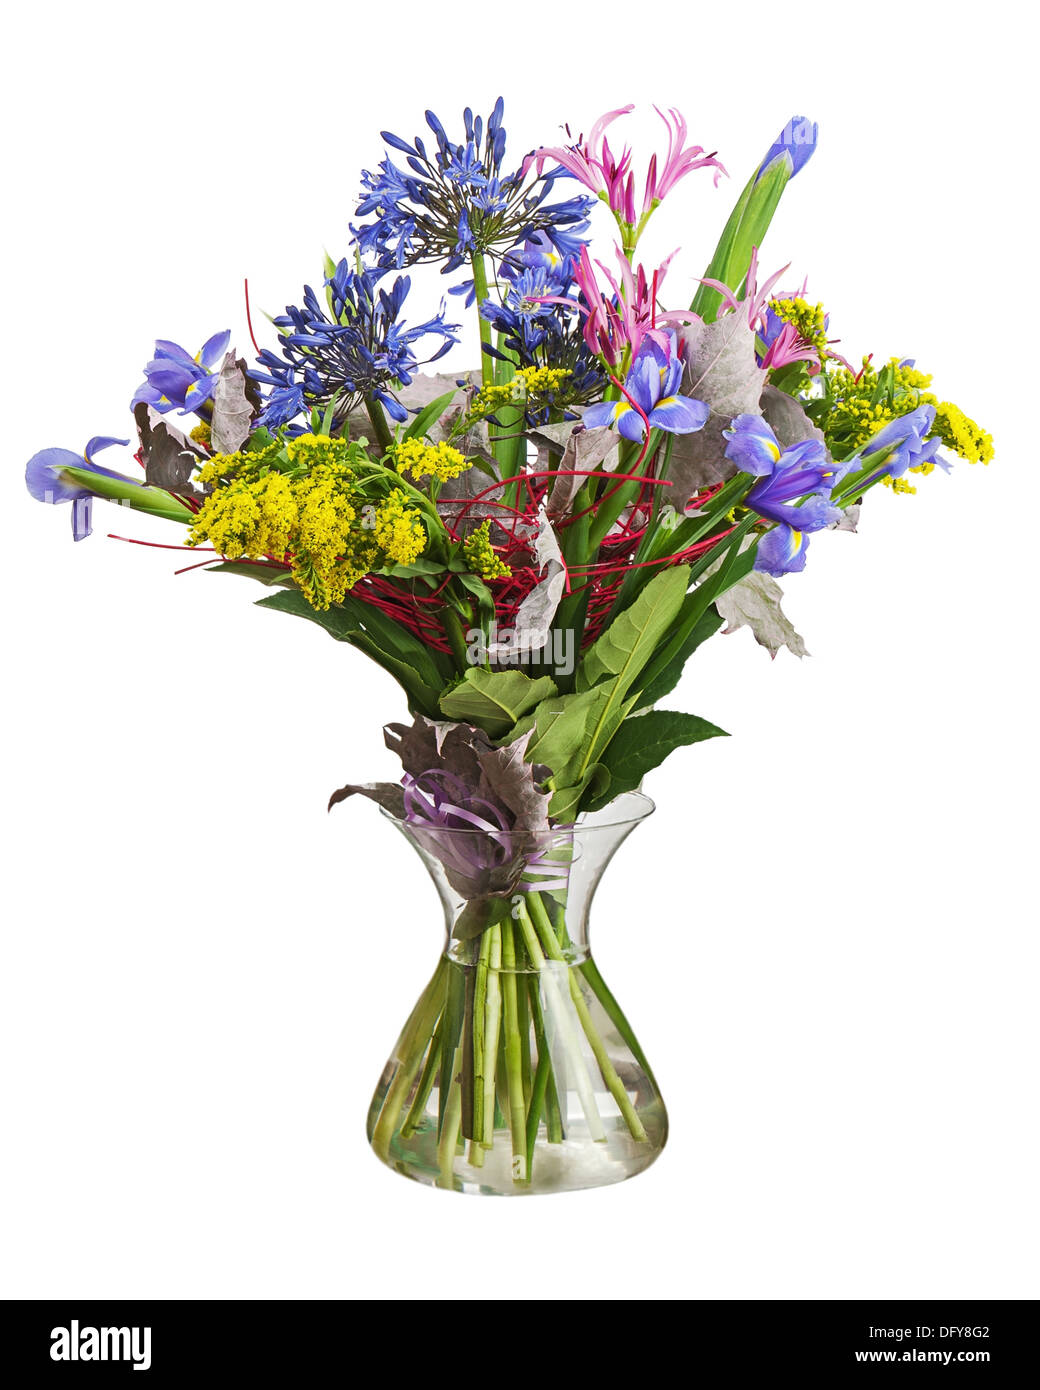 Colorful flower bouquet arrangement centerpiece in vase isolated on white background. Closeup. Stock Photo